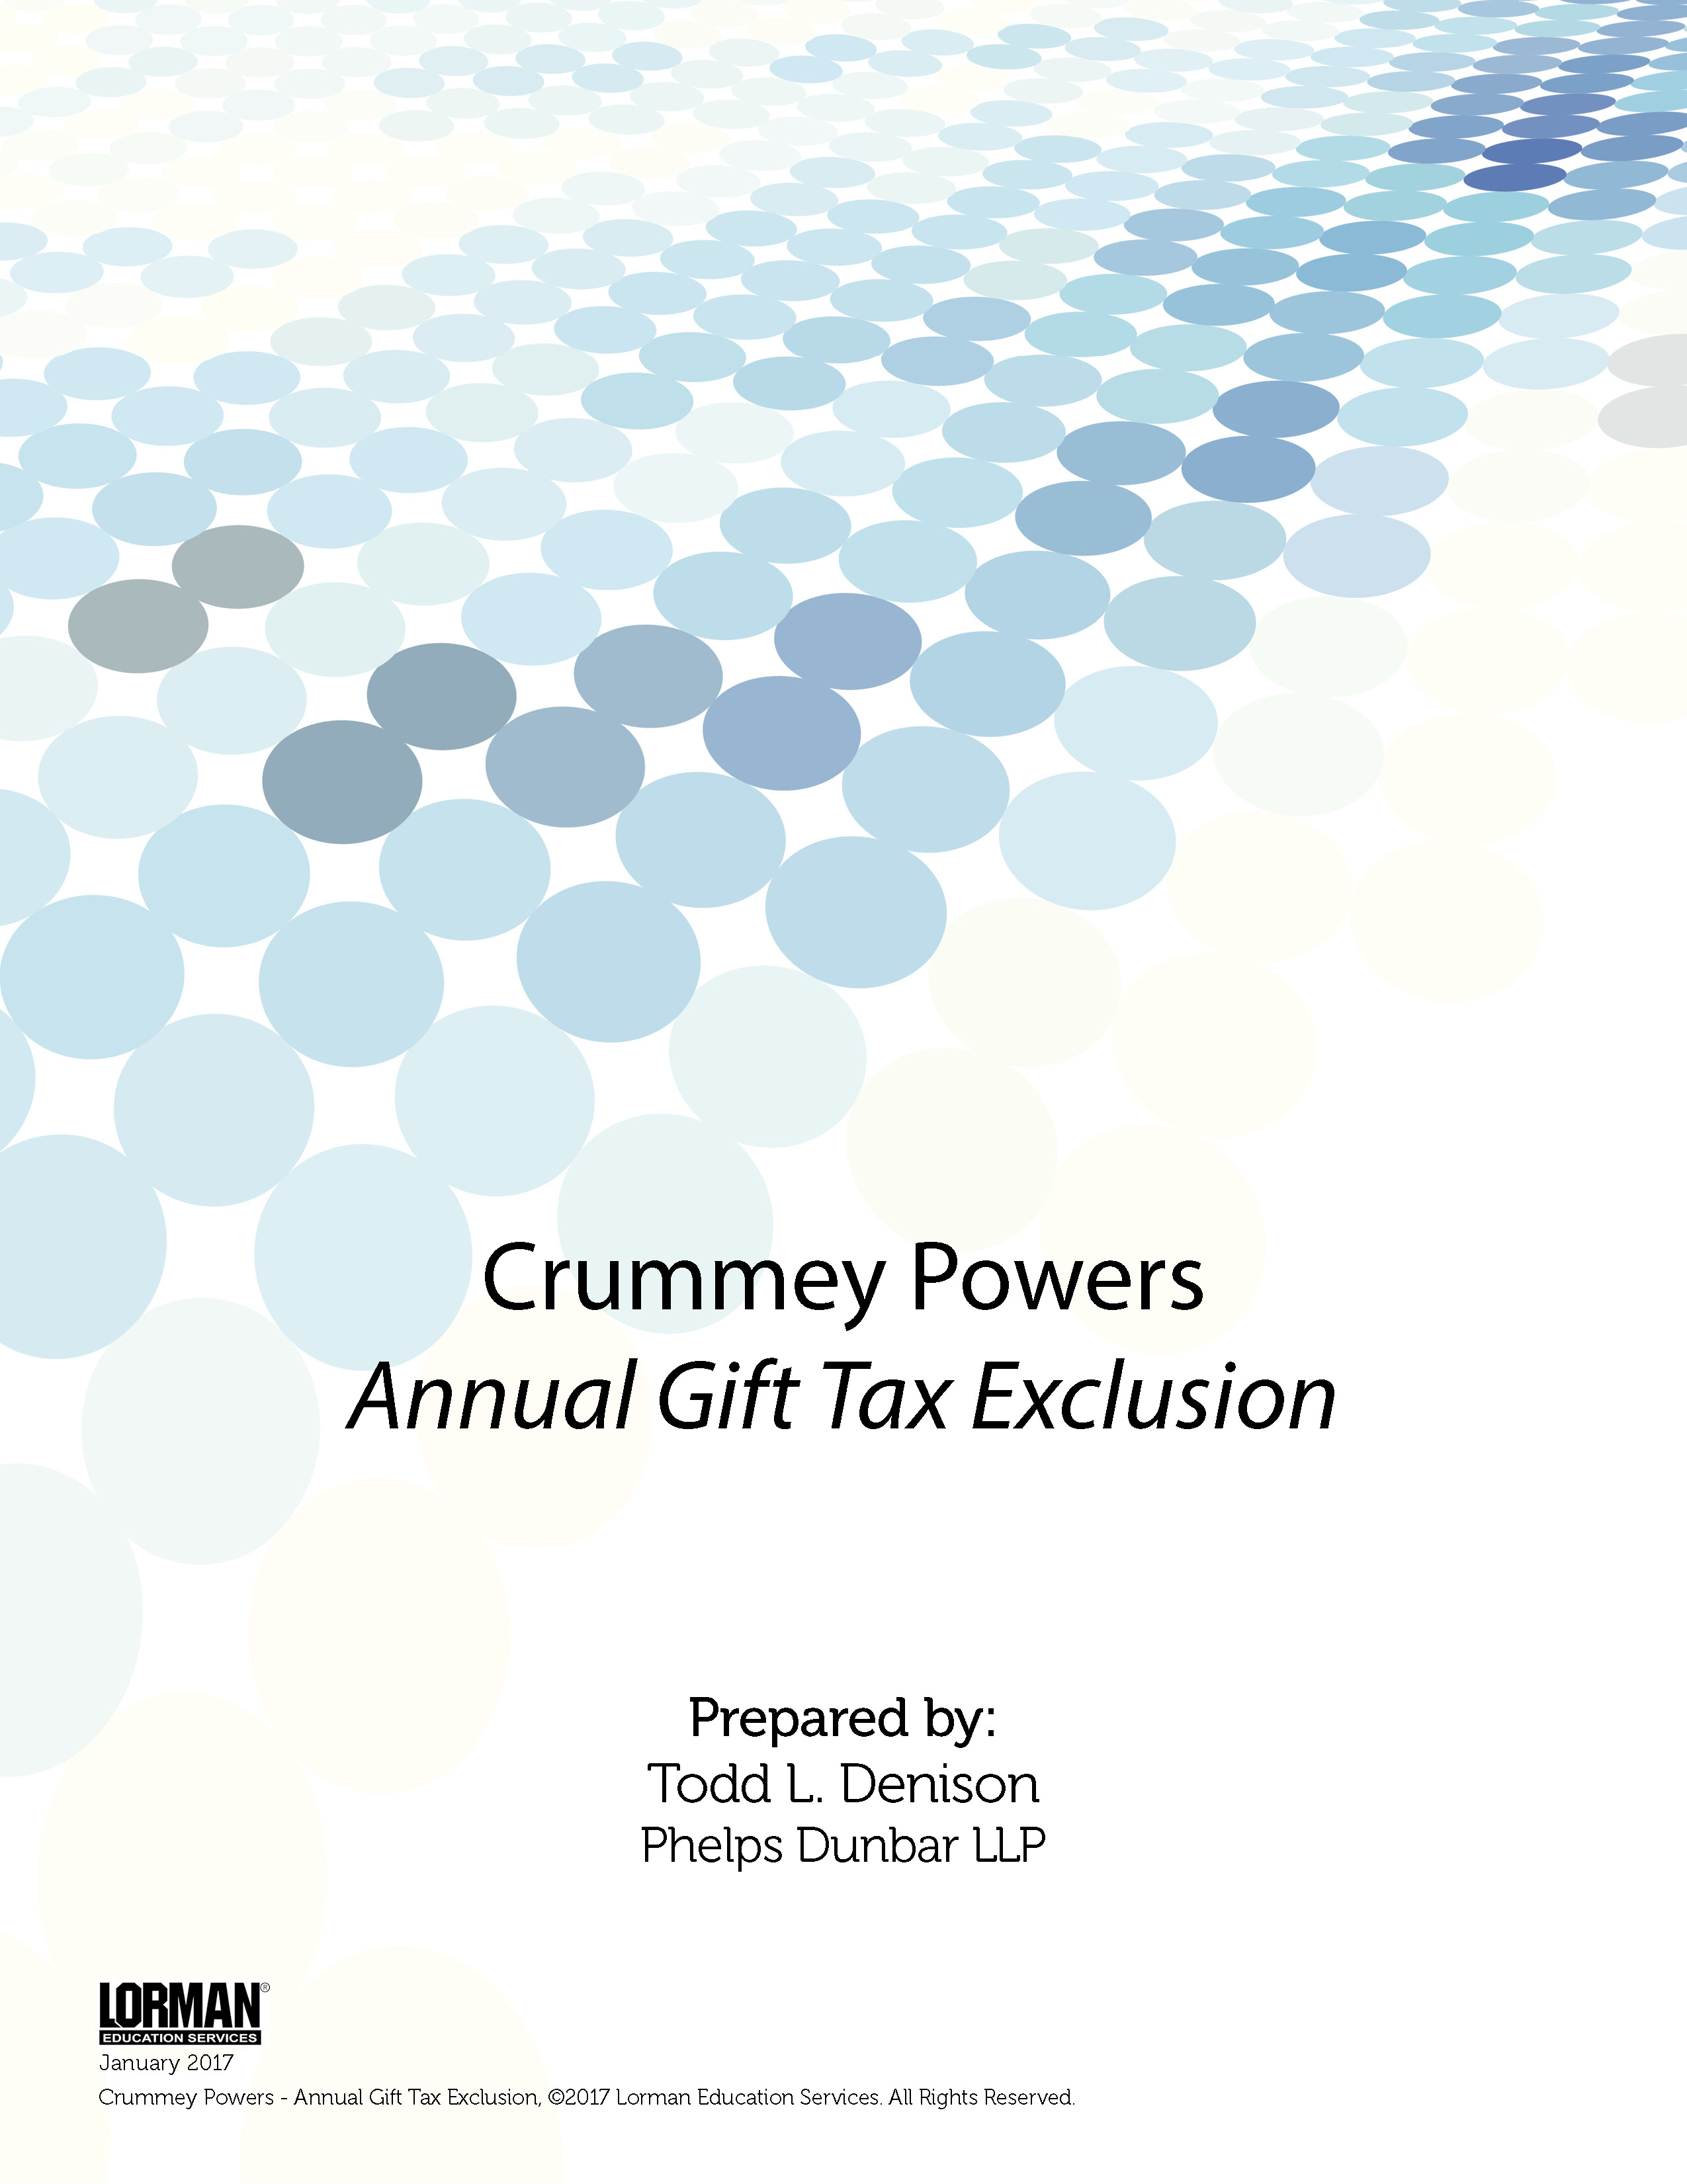 Crummey Powers - Annual Gift Tax Exclusion